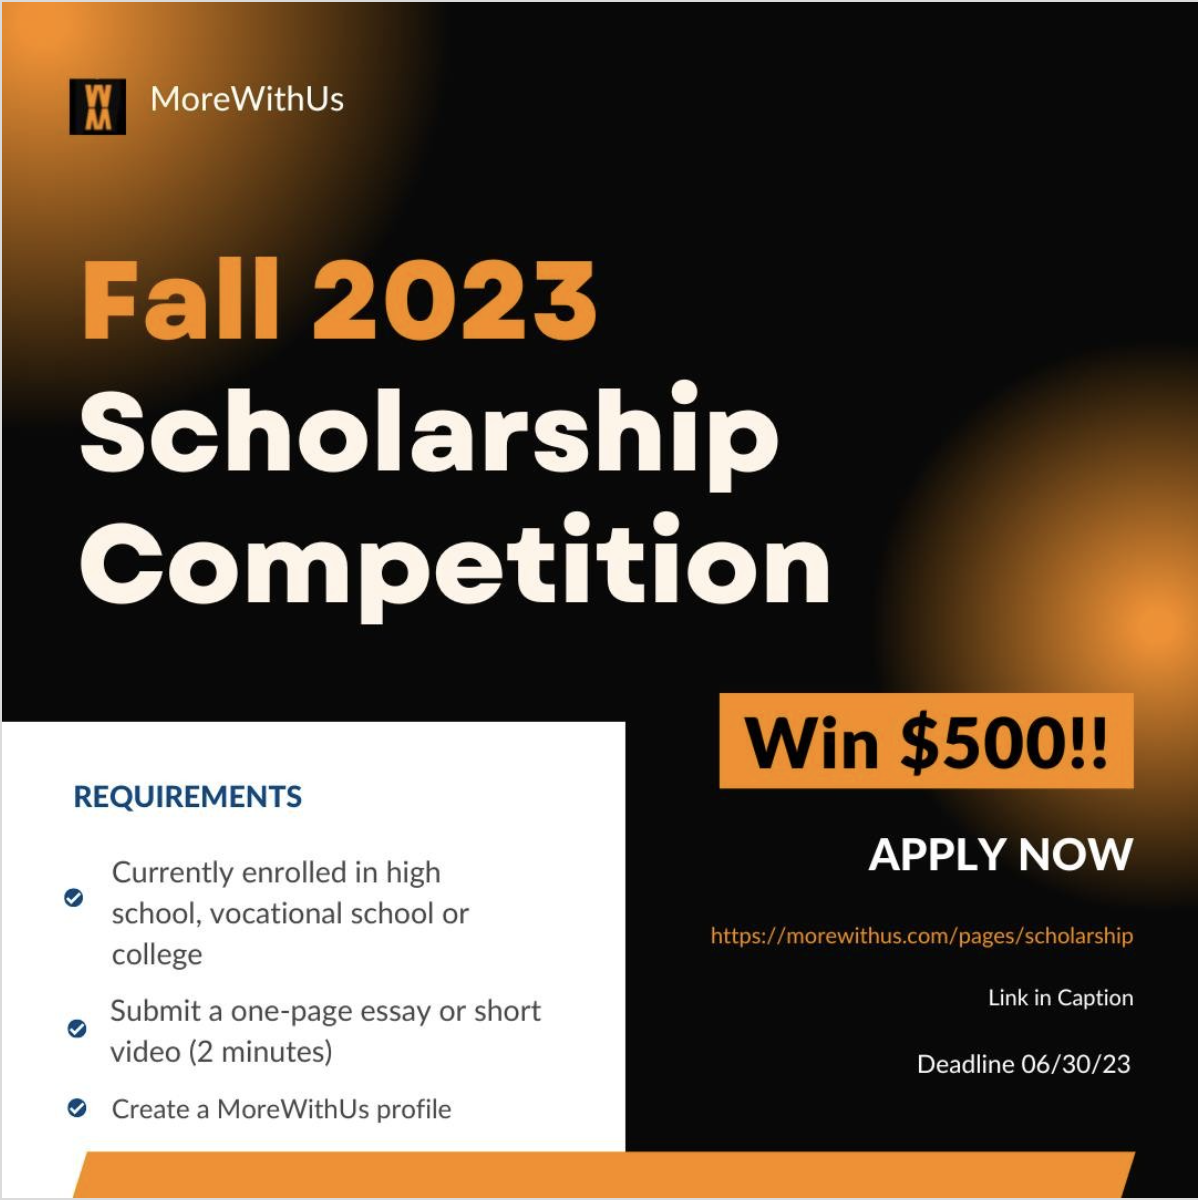 MoreWithUs Fall 2023 Scholarship available - University of Maryland